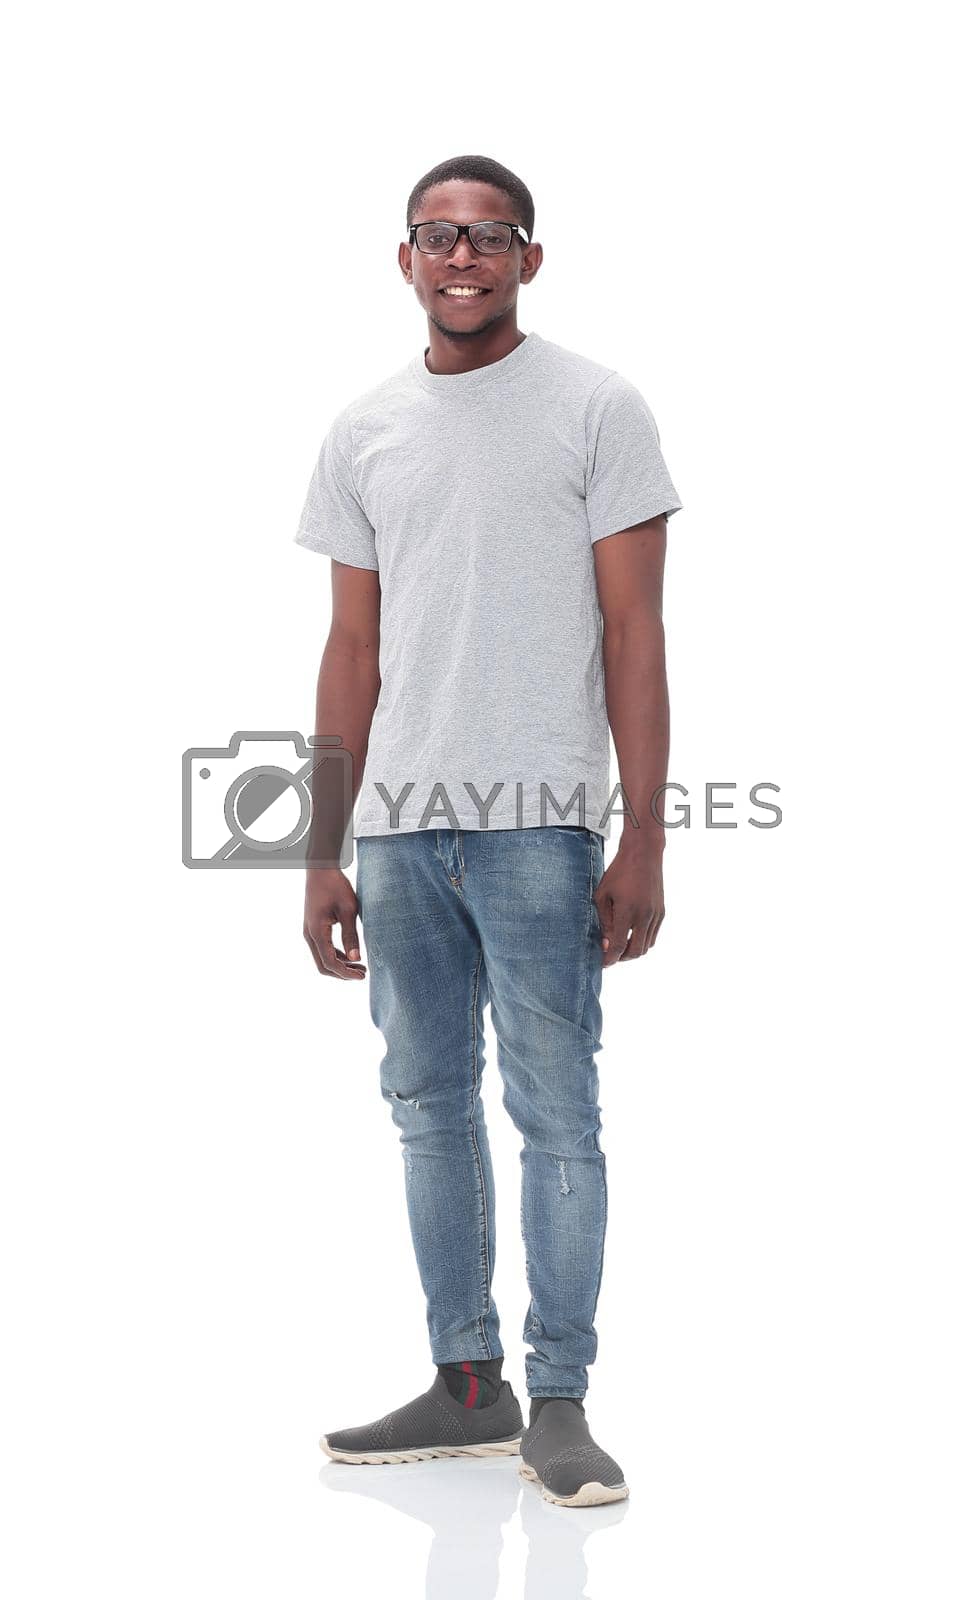 Royalty free image of casual guy in jeans and white t-shirt by asdf